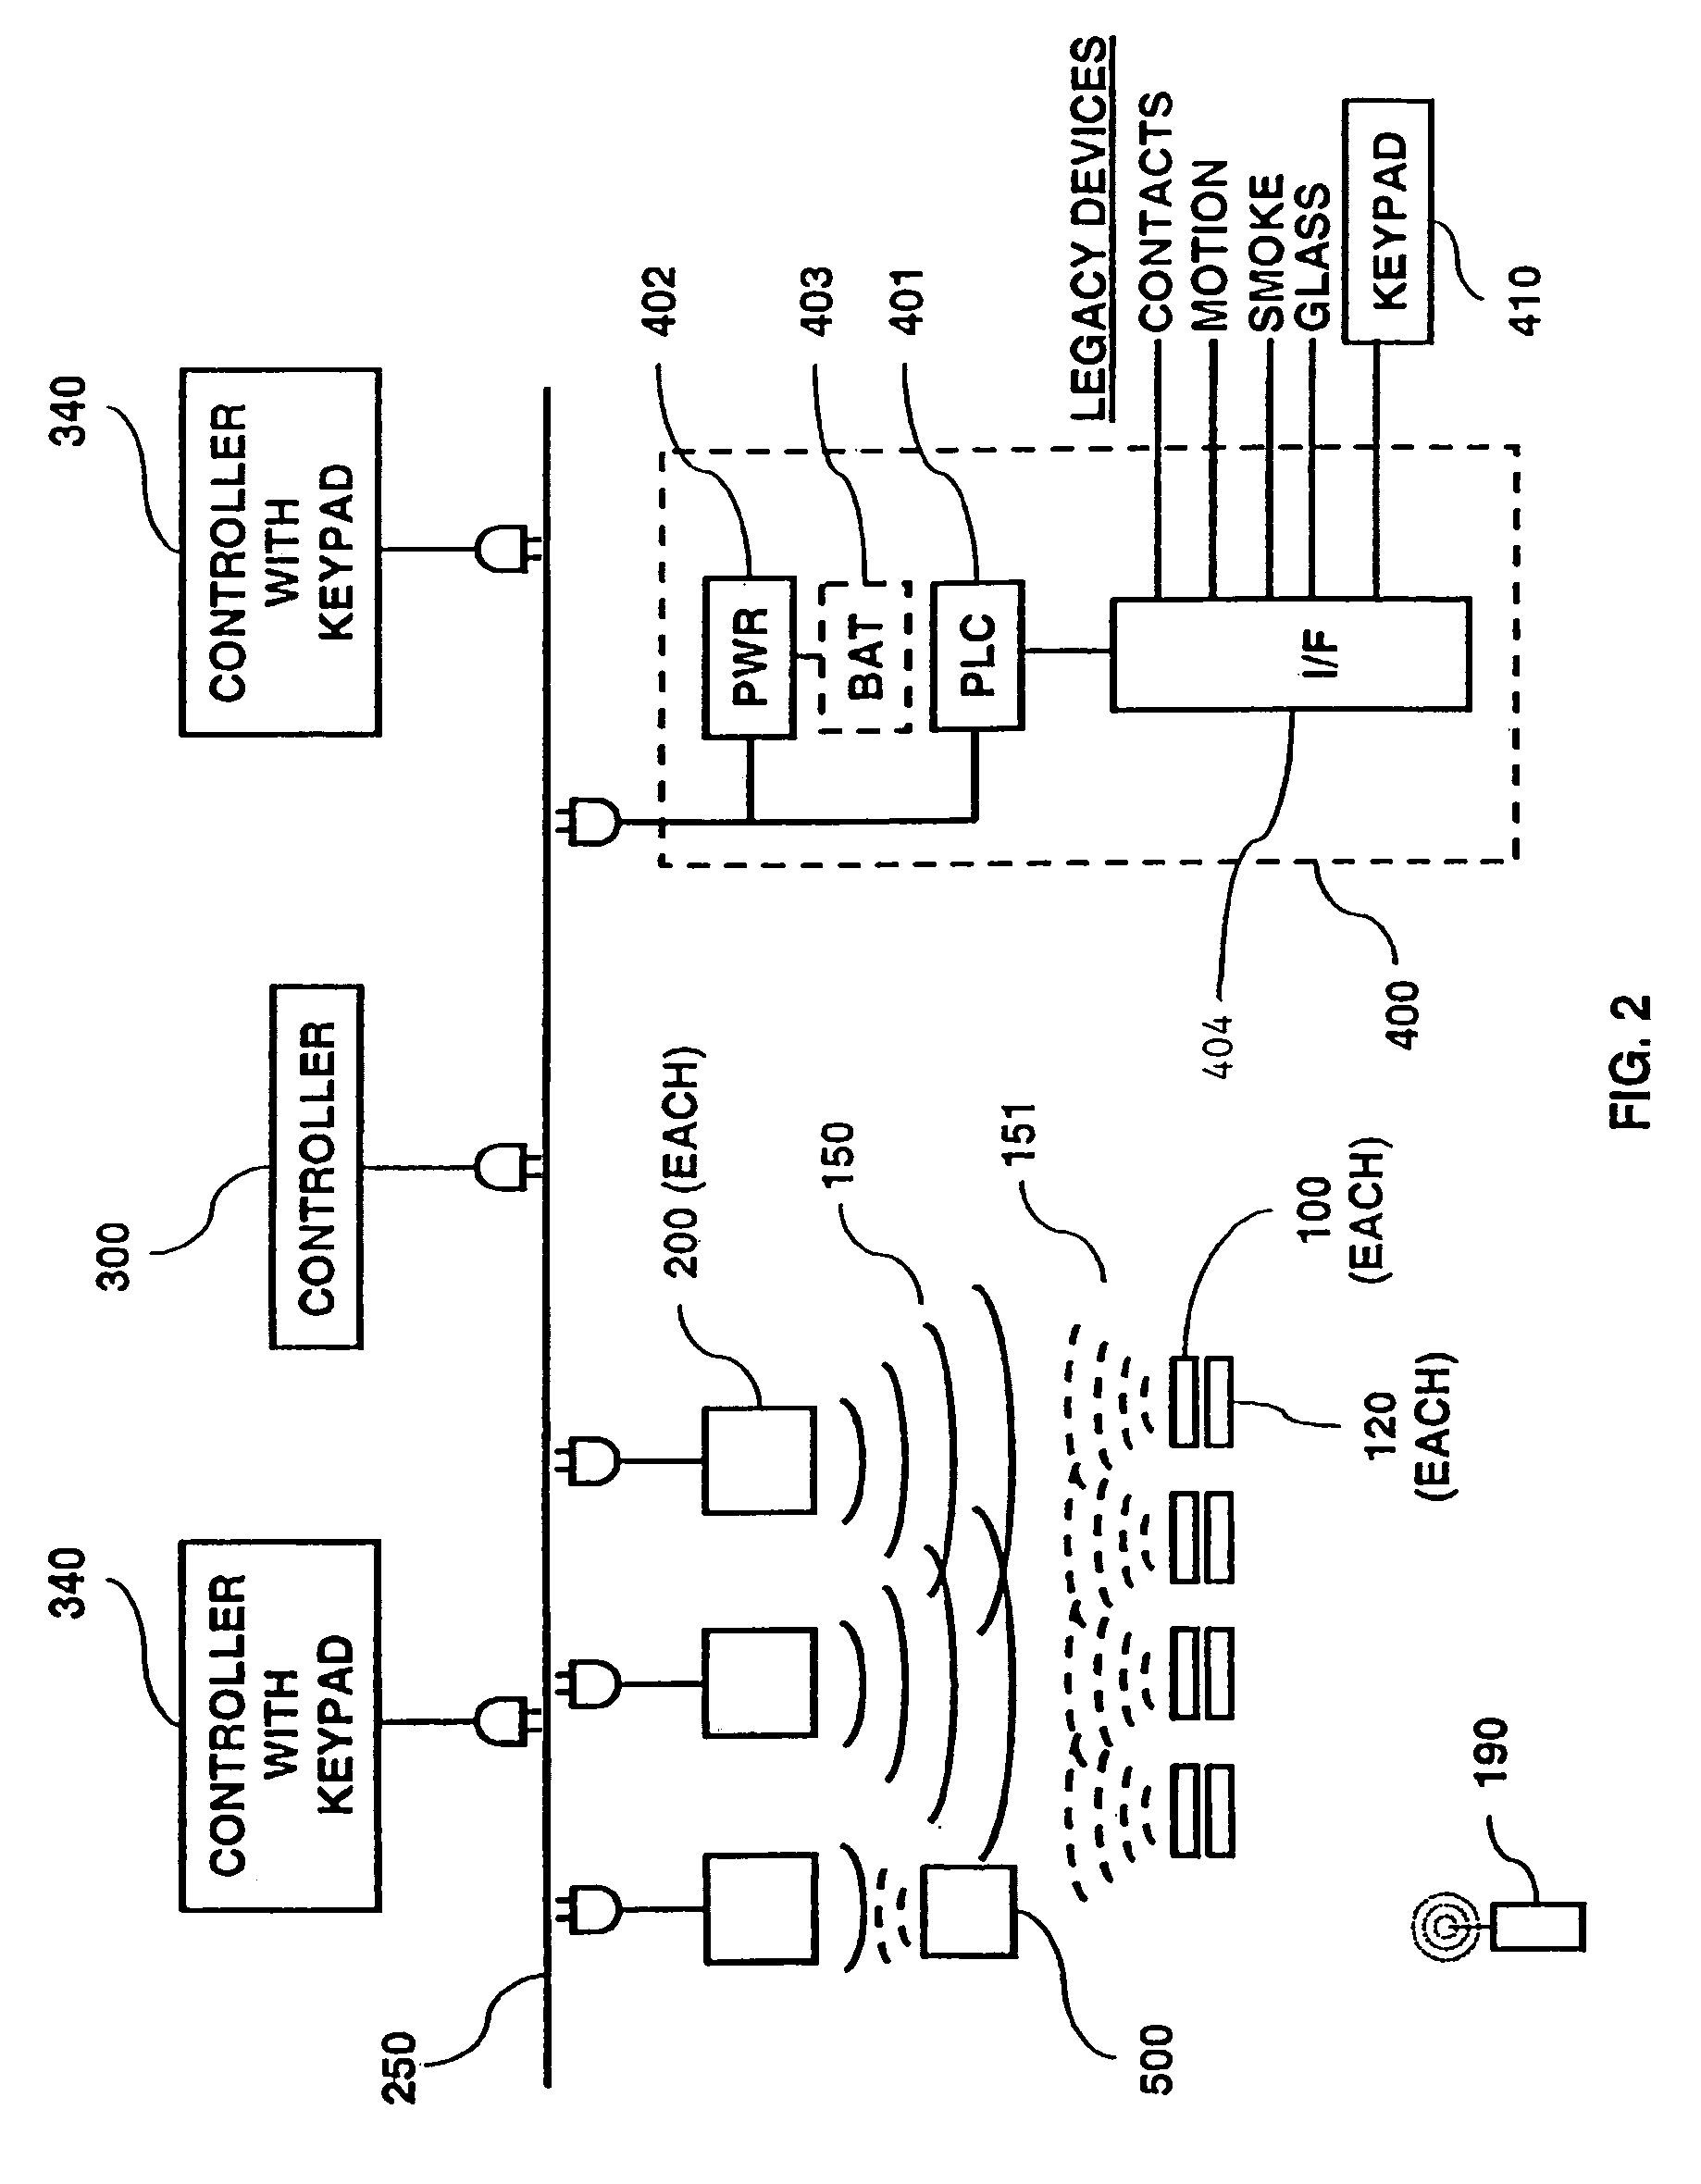 Controller for a security system